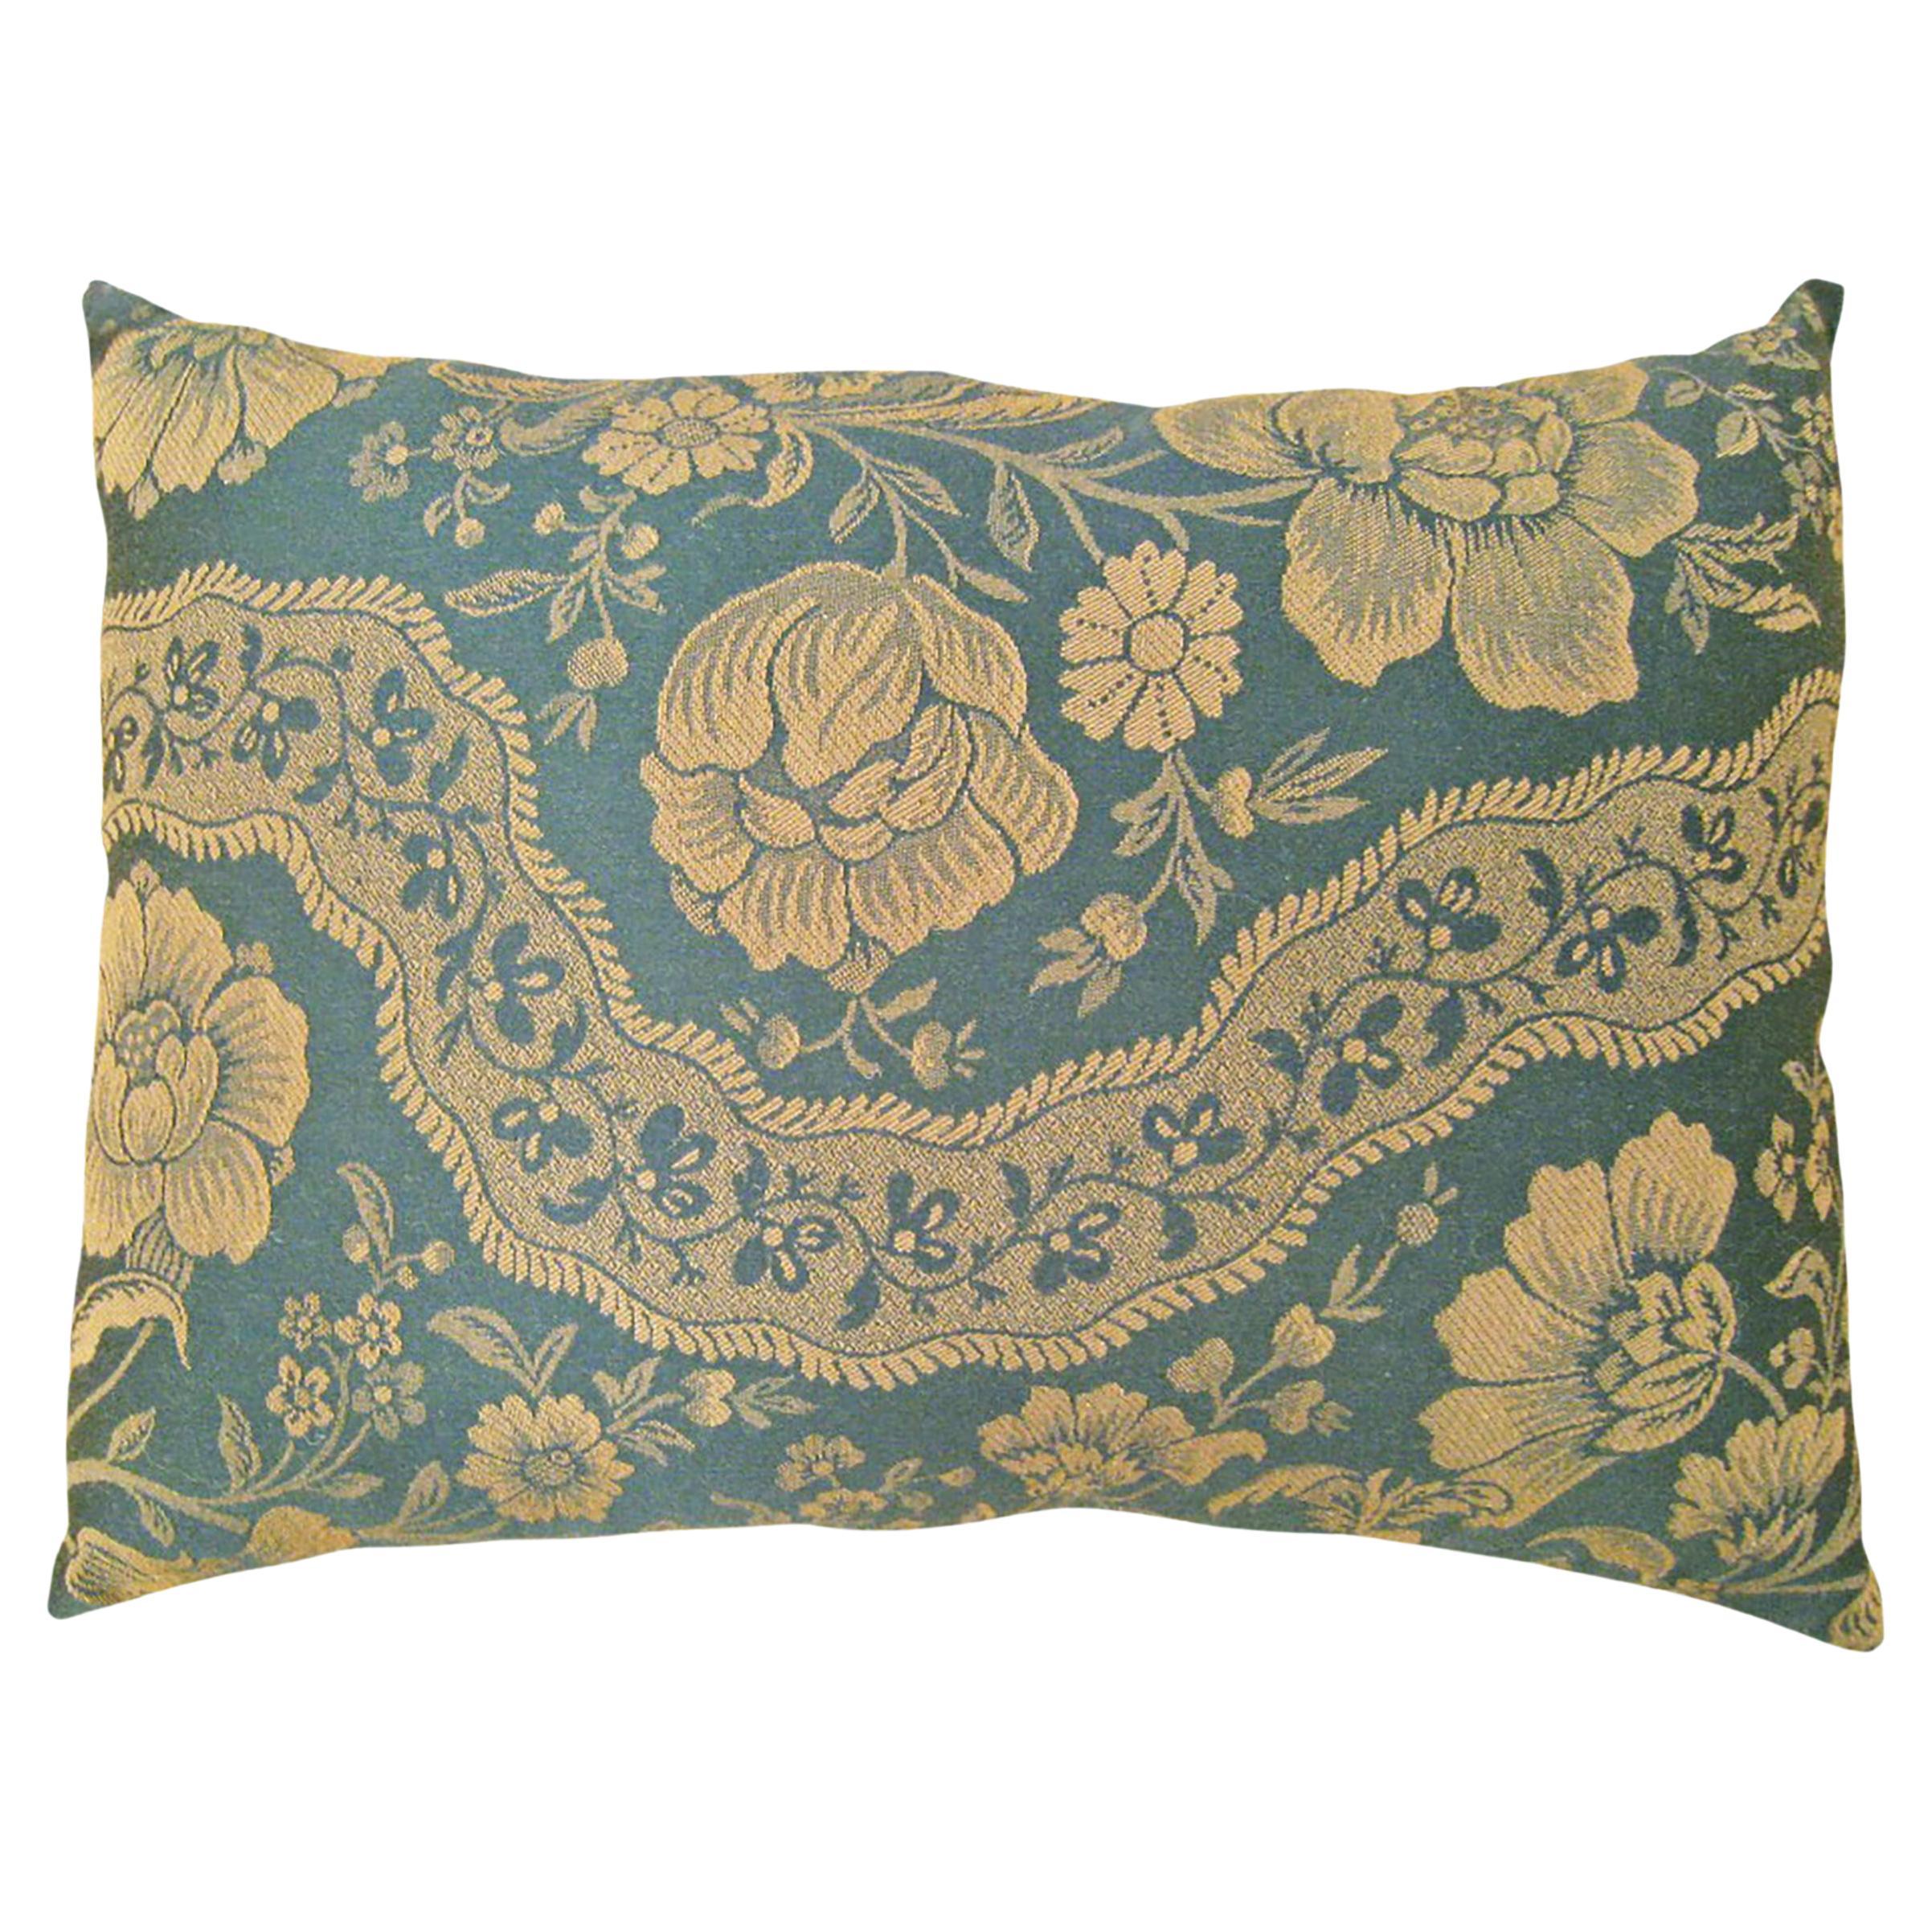 Decorative Vintage European Chinoiserie Fabric Pillow with Floral Design For Sale